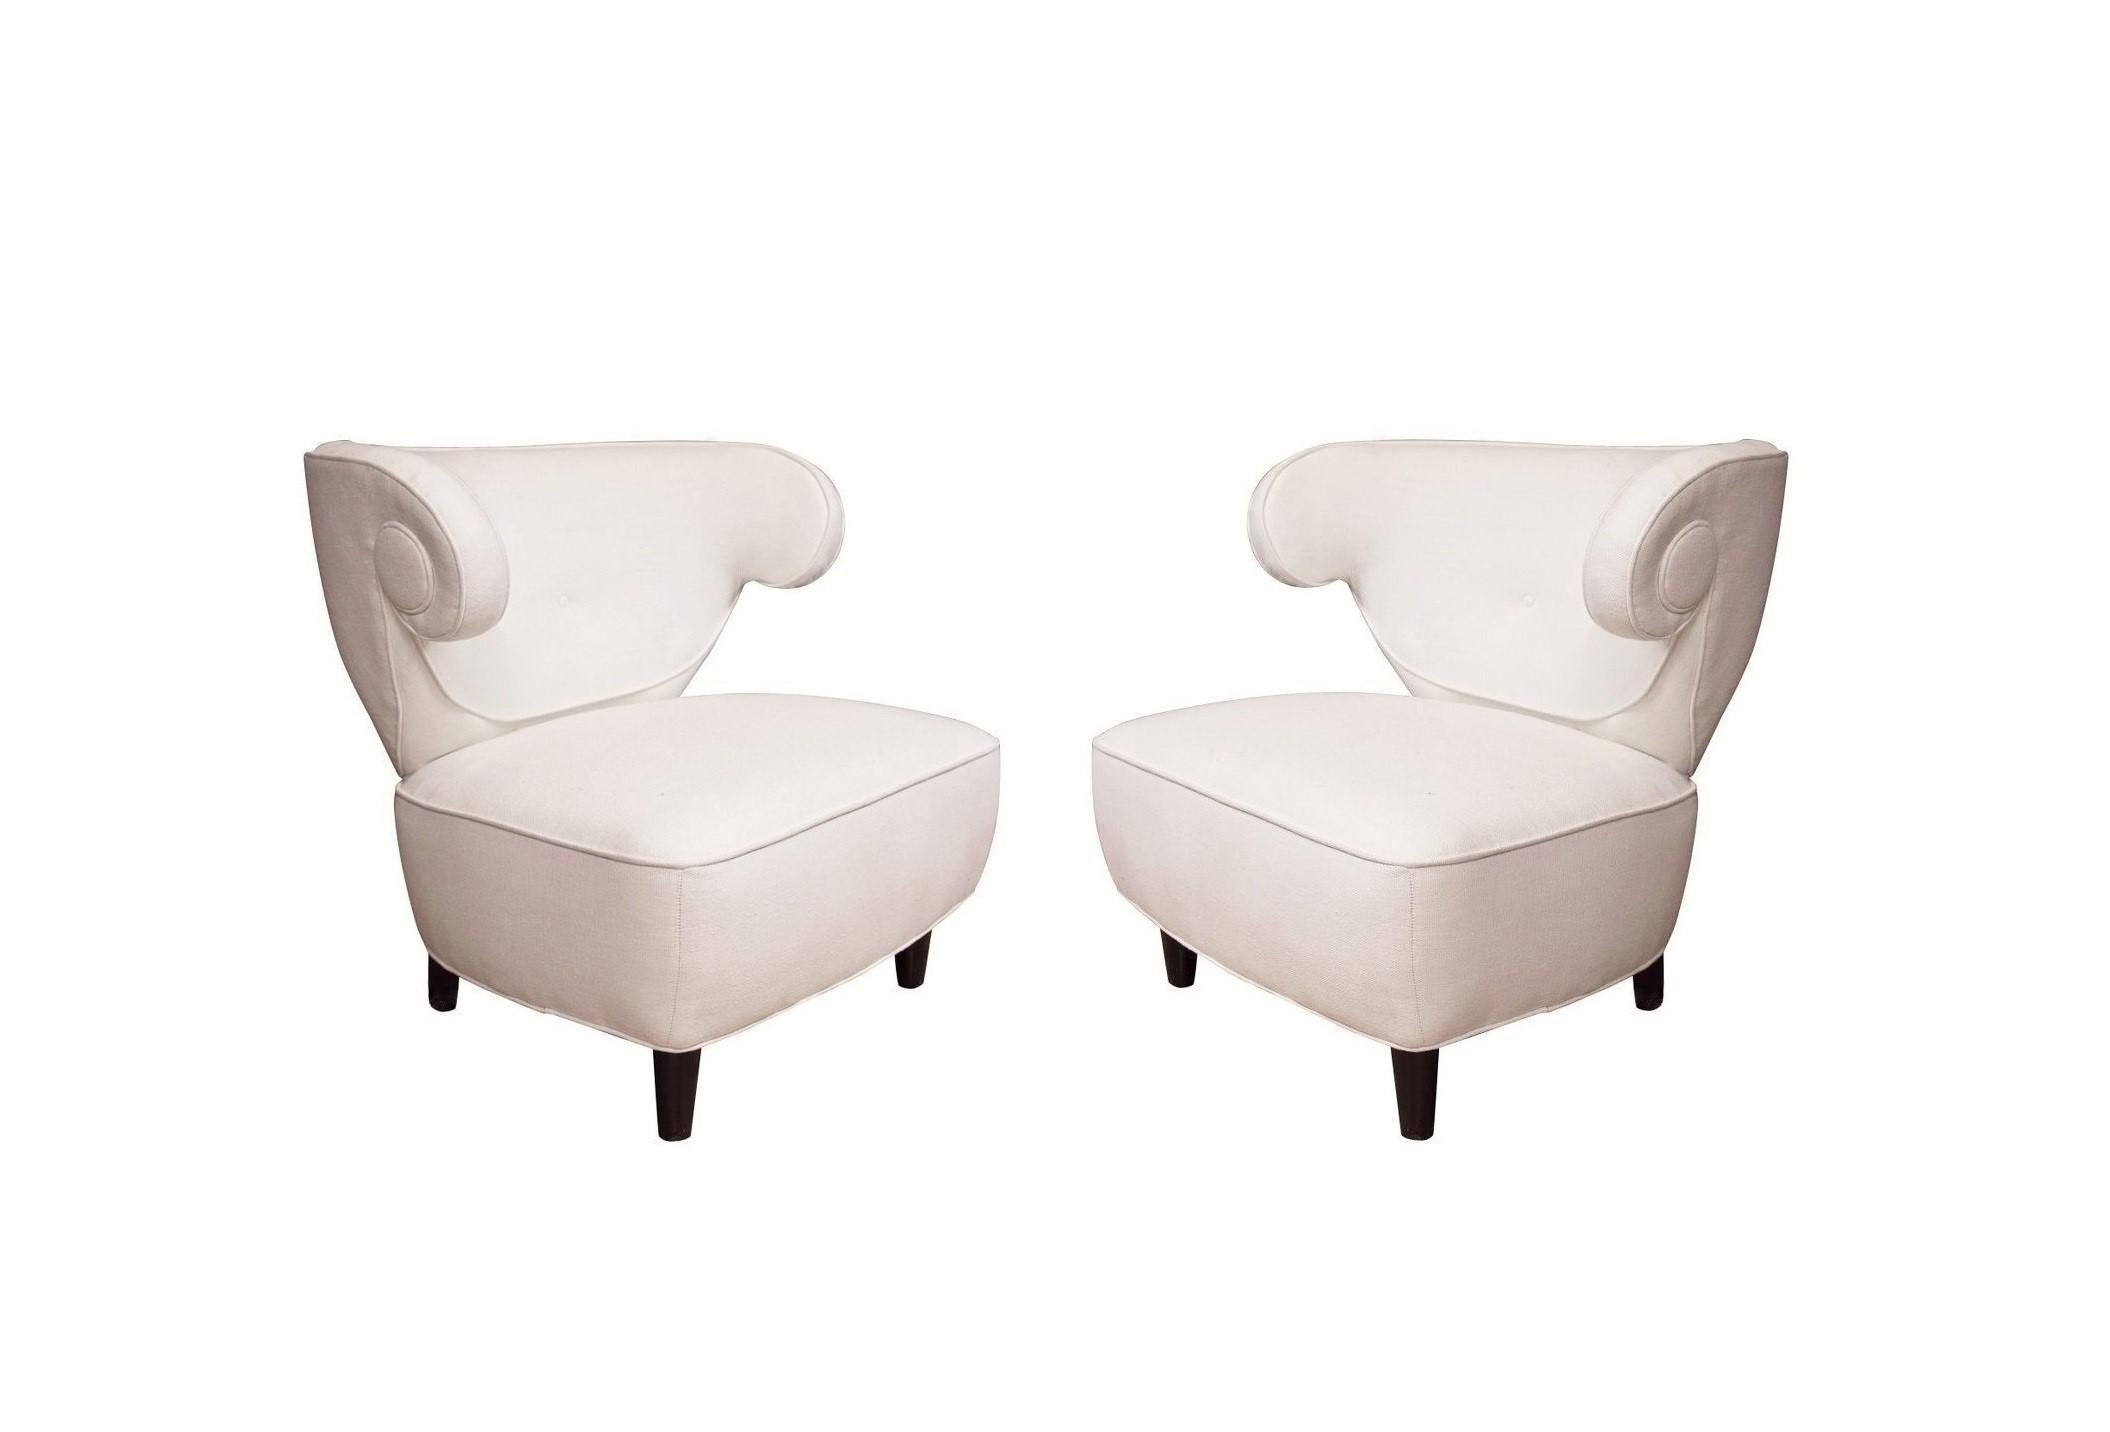 Pair of Scrolled-Arm Chairs by Paul László, 1940s For Sale 1